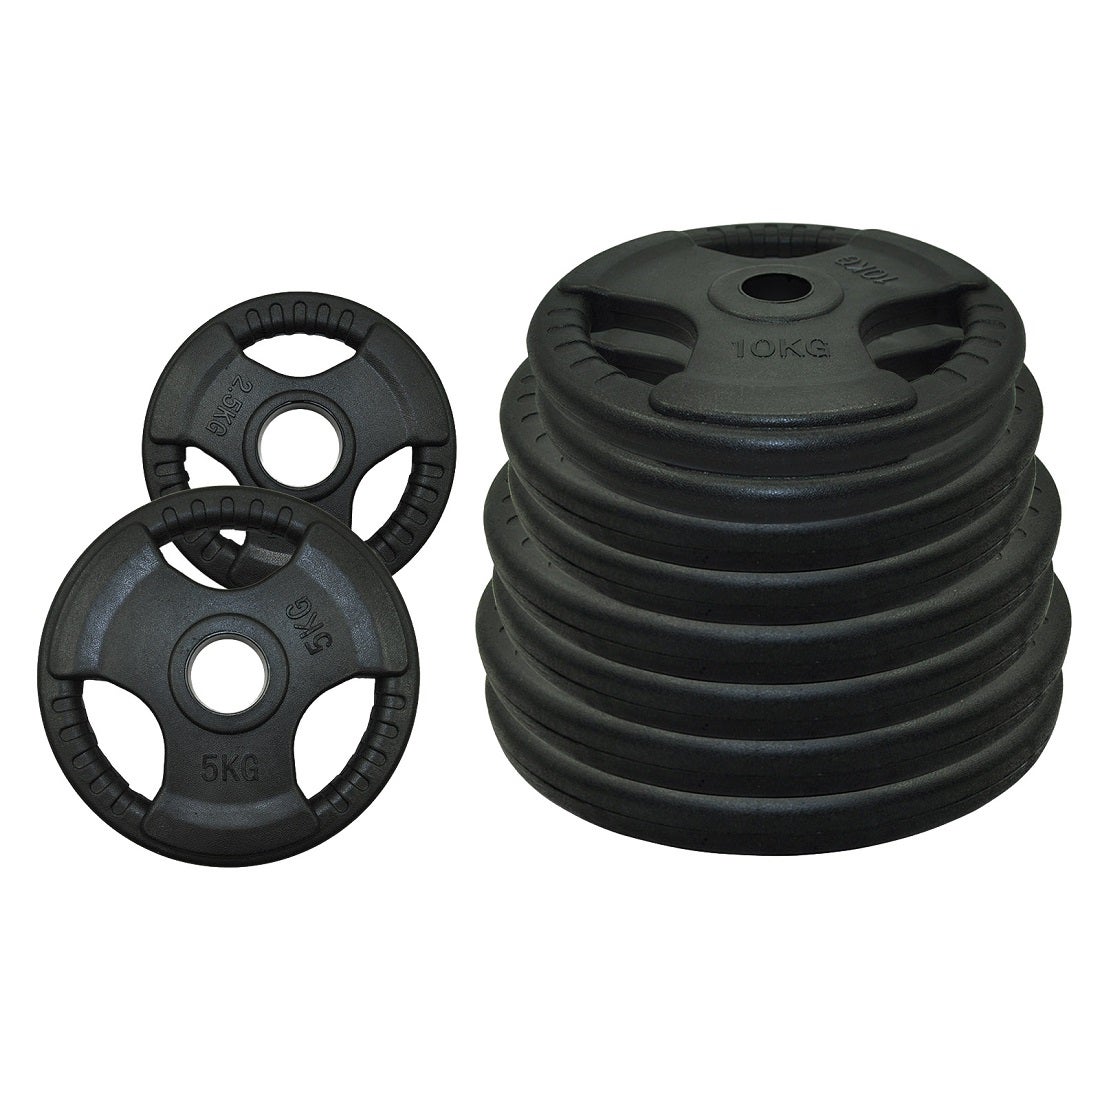 Total 60kg Olympic Rubber Coated Cast Iron Weight Plate Set - Commercial Grade